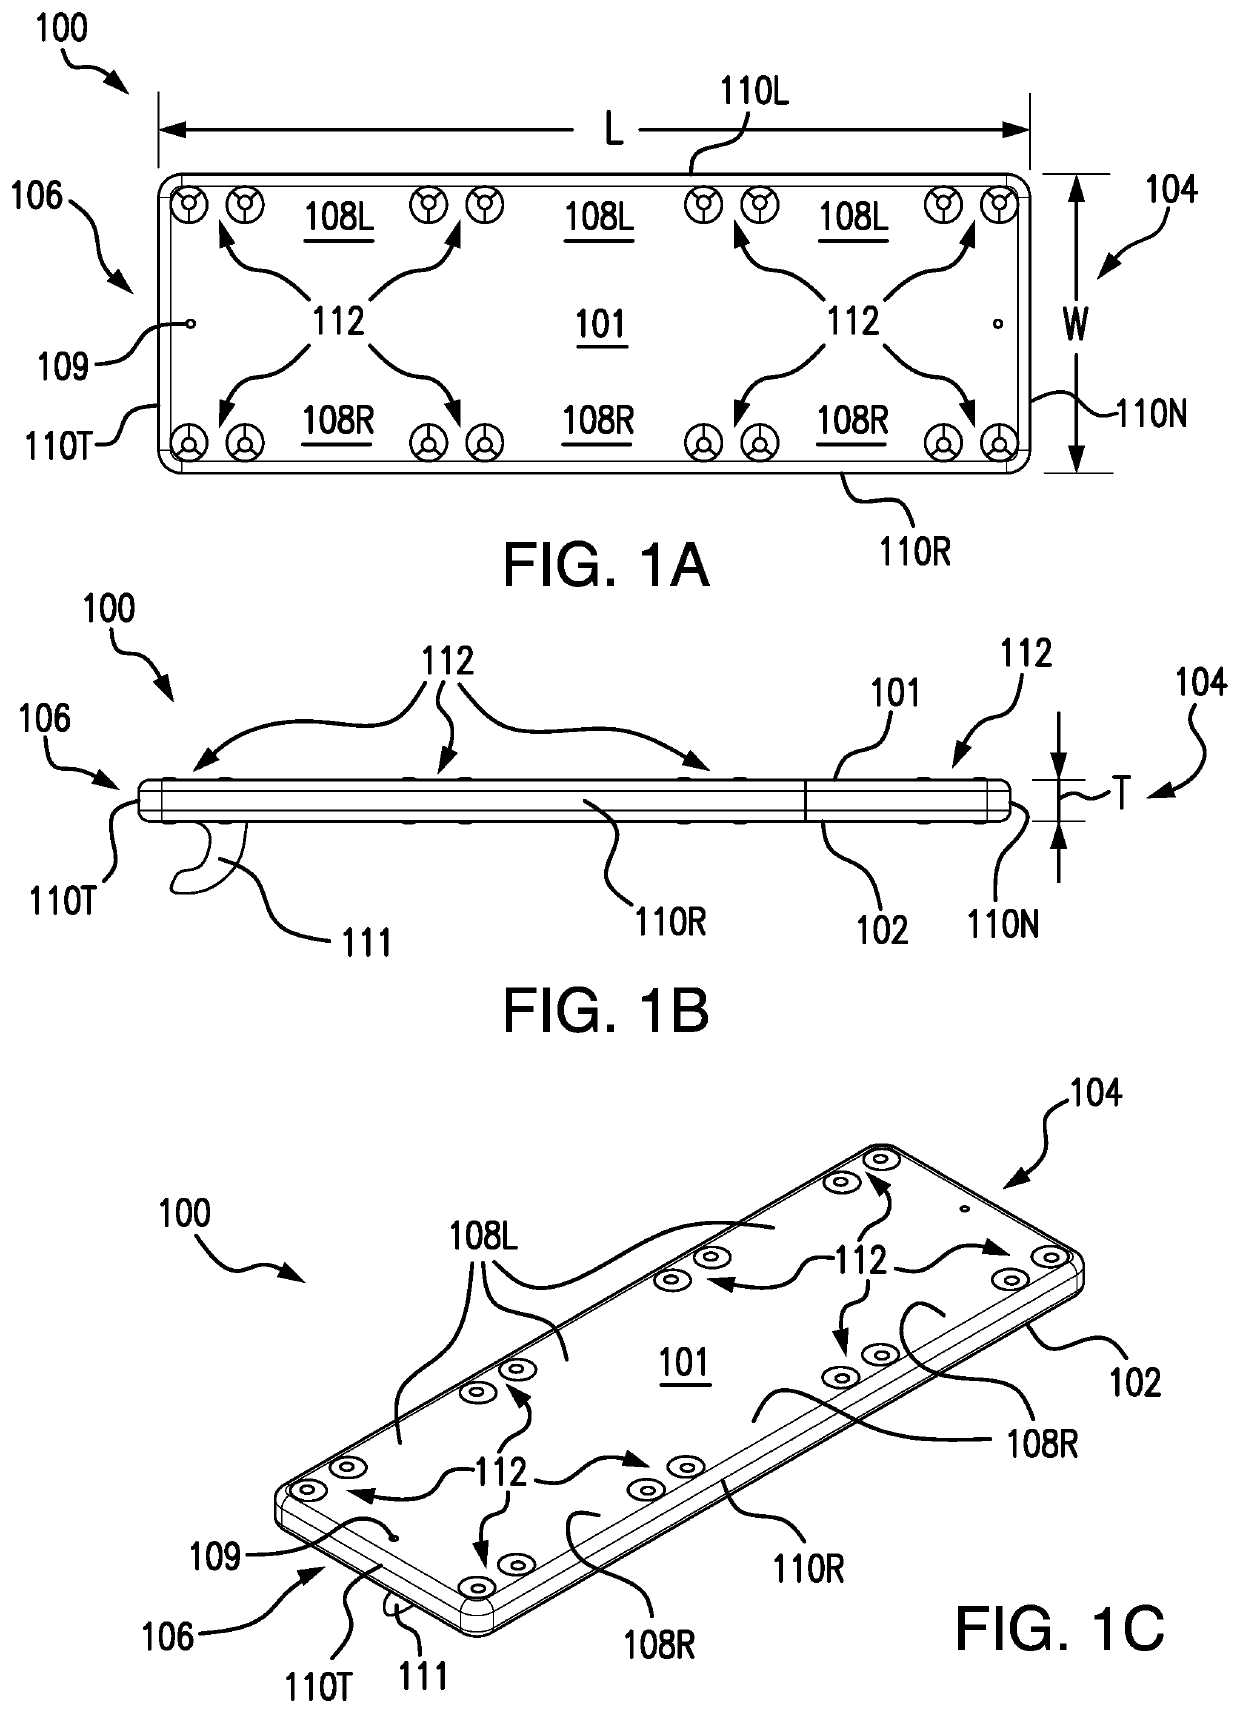 Methods, apparatus, and systems for connecting plural stand-up paddle boards together to form an extended floating platform